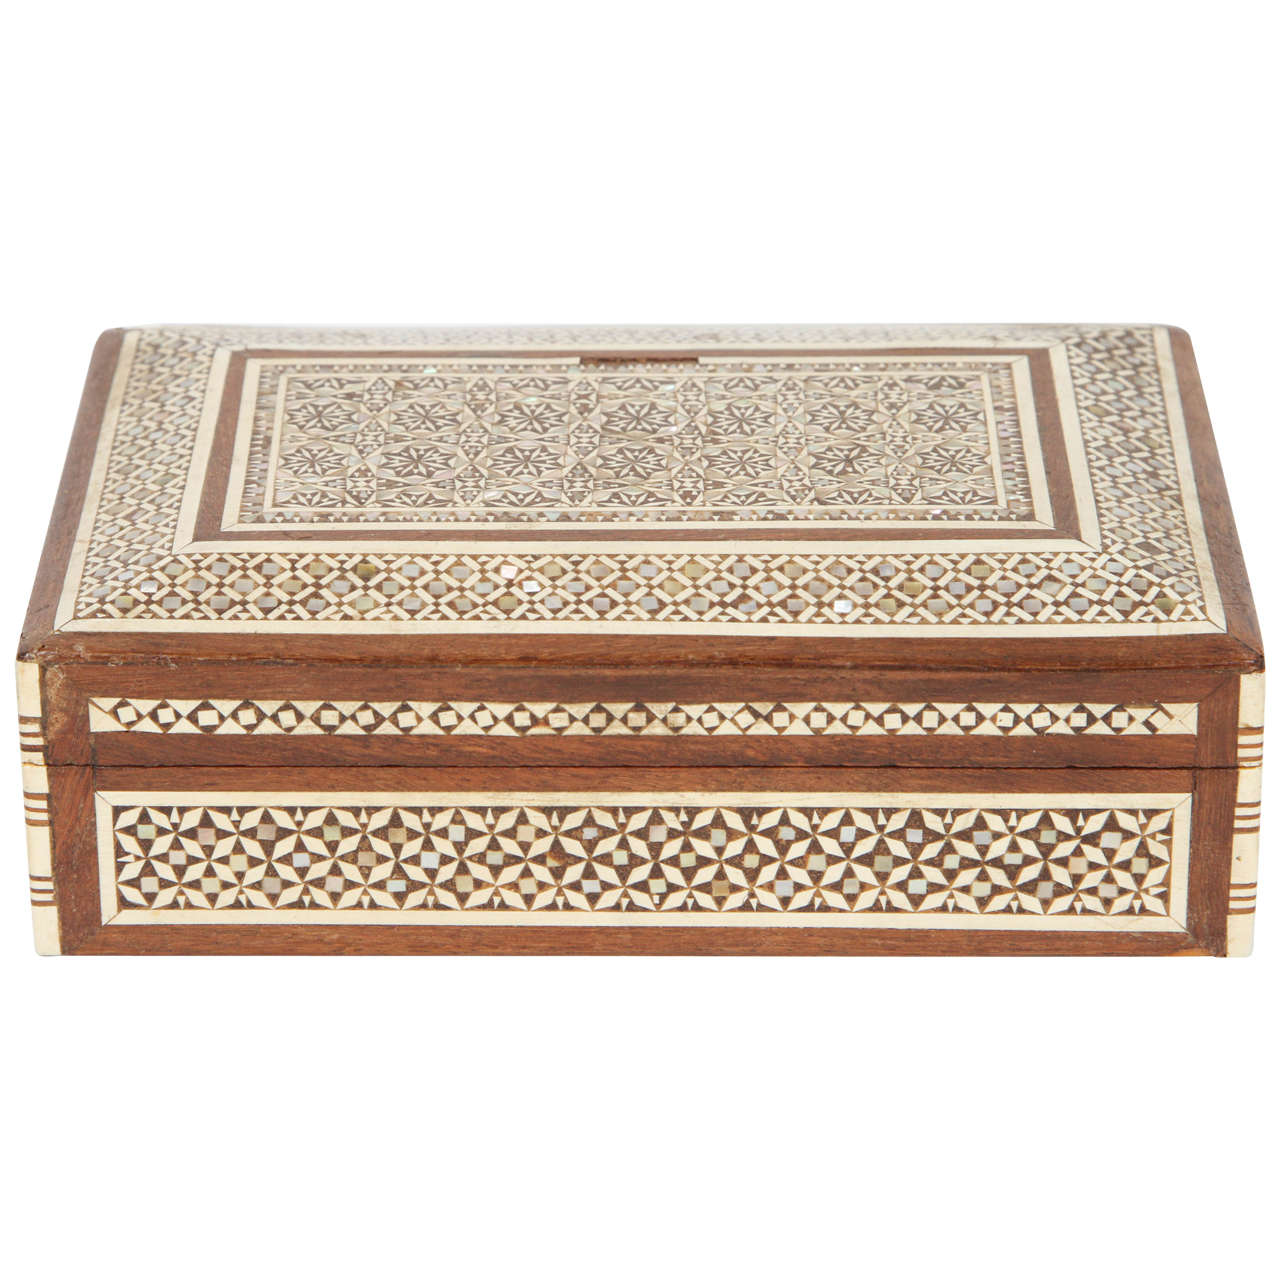 Antique Syrian Mother of Pearl Inlay Box